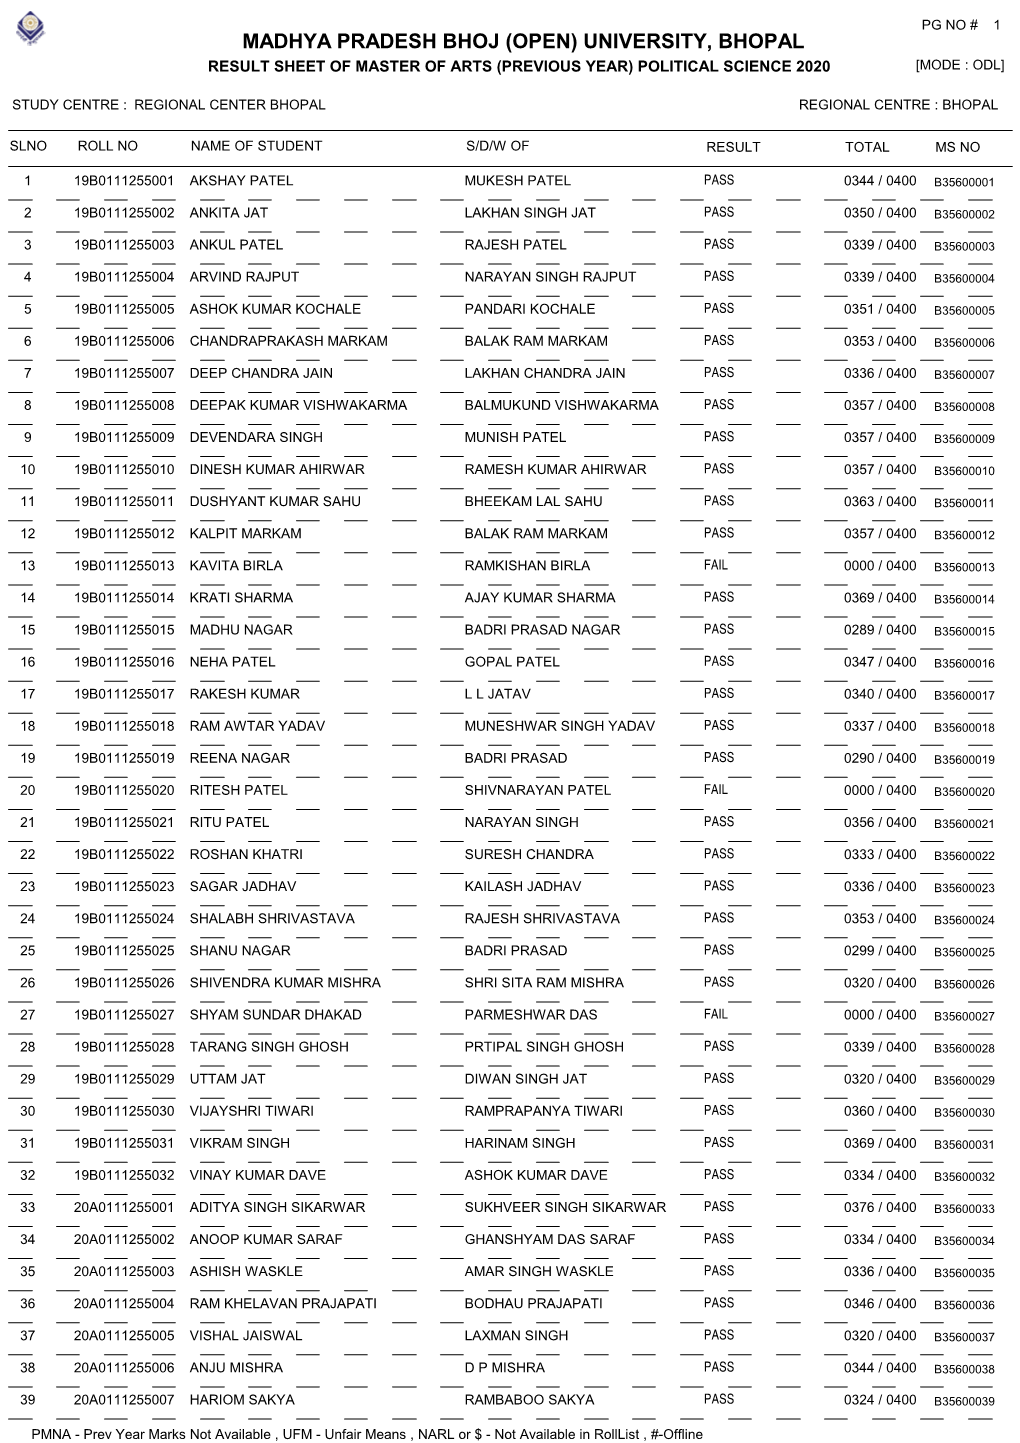 University, Bhopal Result Sheet of Master of Arts (Previous Year) Political Science 2020 [Mode : Odl]